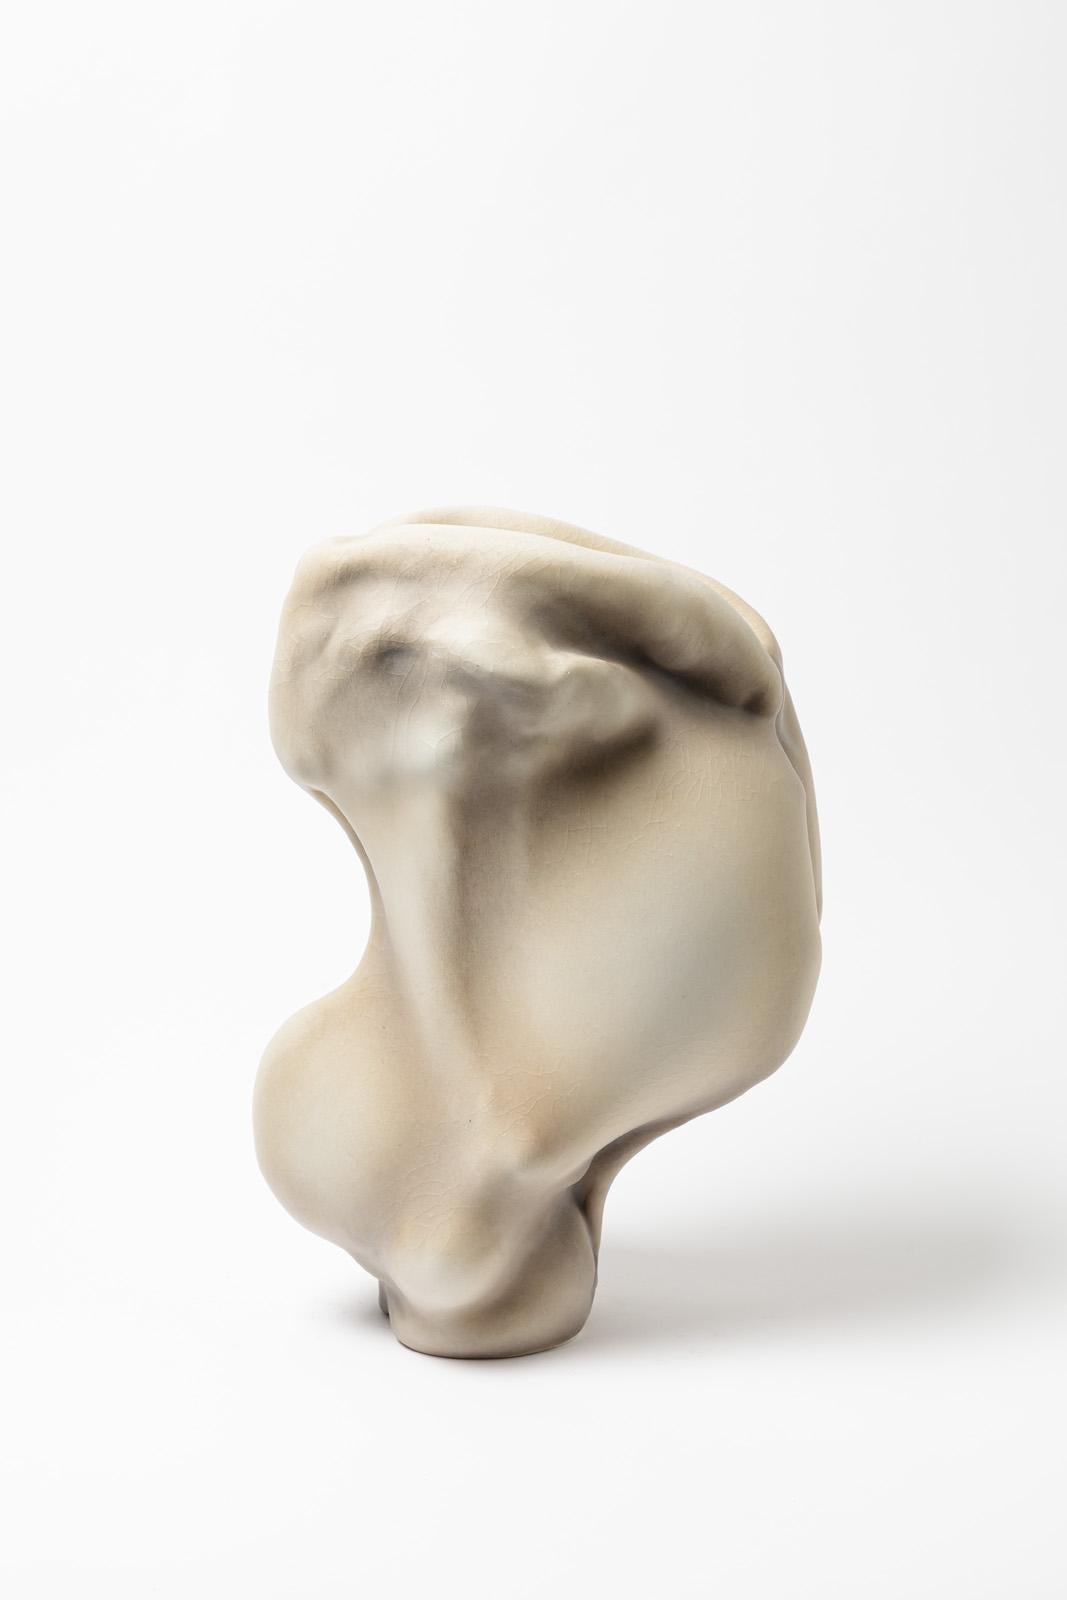 A porcelain sculpture by Wayne Fischer.
Perfect original conditions.
Signed.
Unique piece.
2022.

How can an inert object produce deeply unsuspecting, indecipherable, uncontrollable emotions?
Wayne Fischer is an artist who can create works